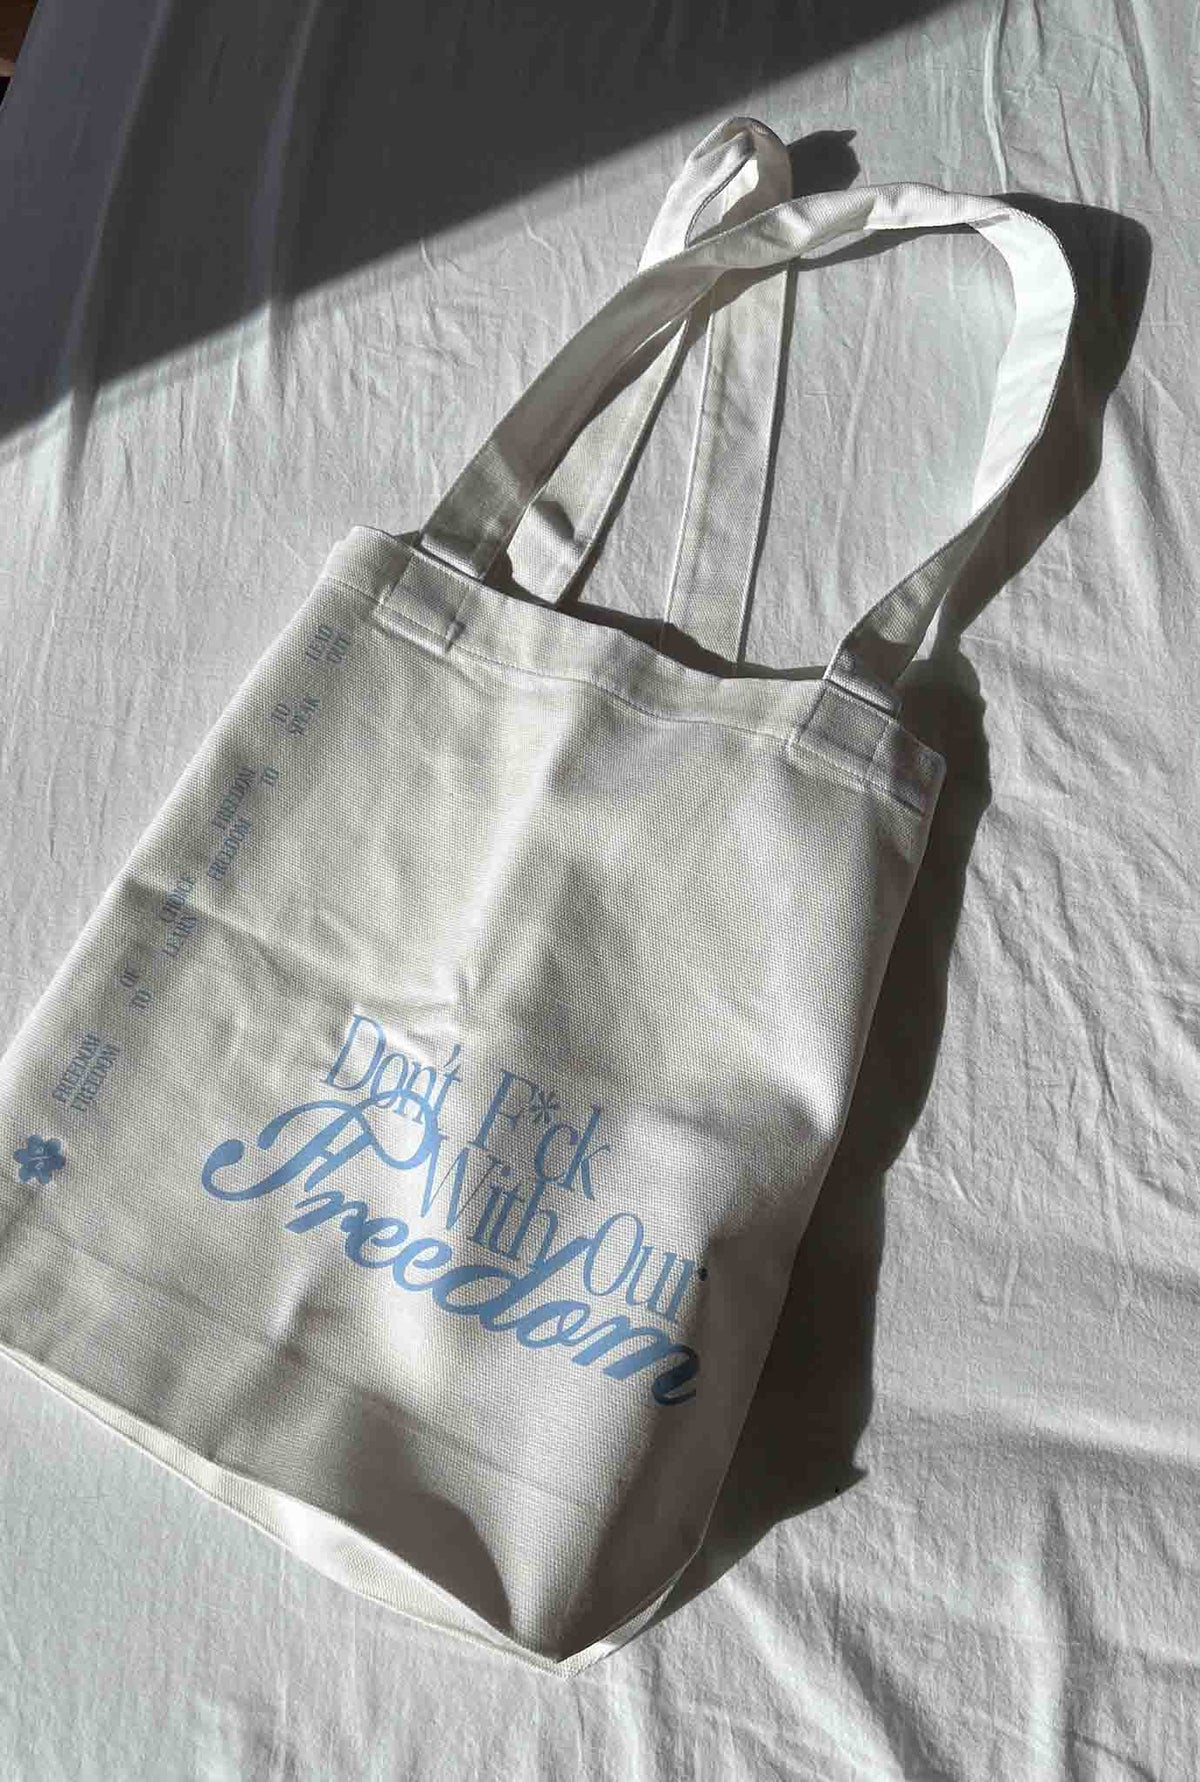 Don't F*ck With Our Freedom Tote Bag - Natural